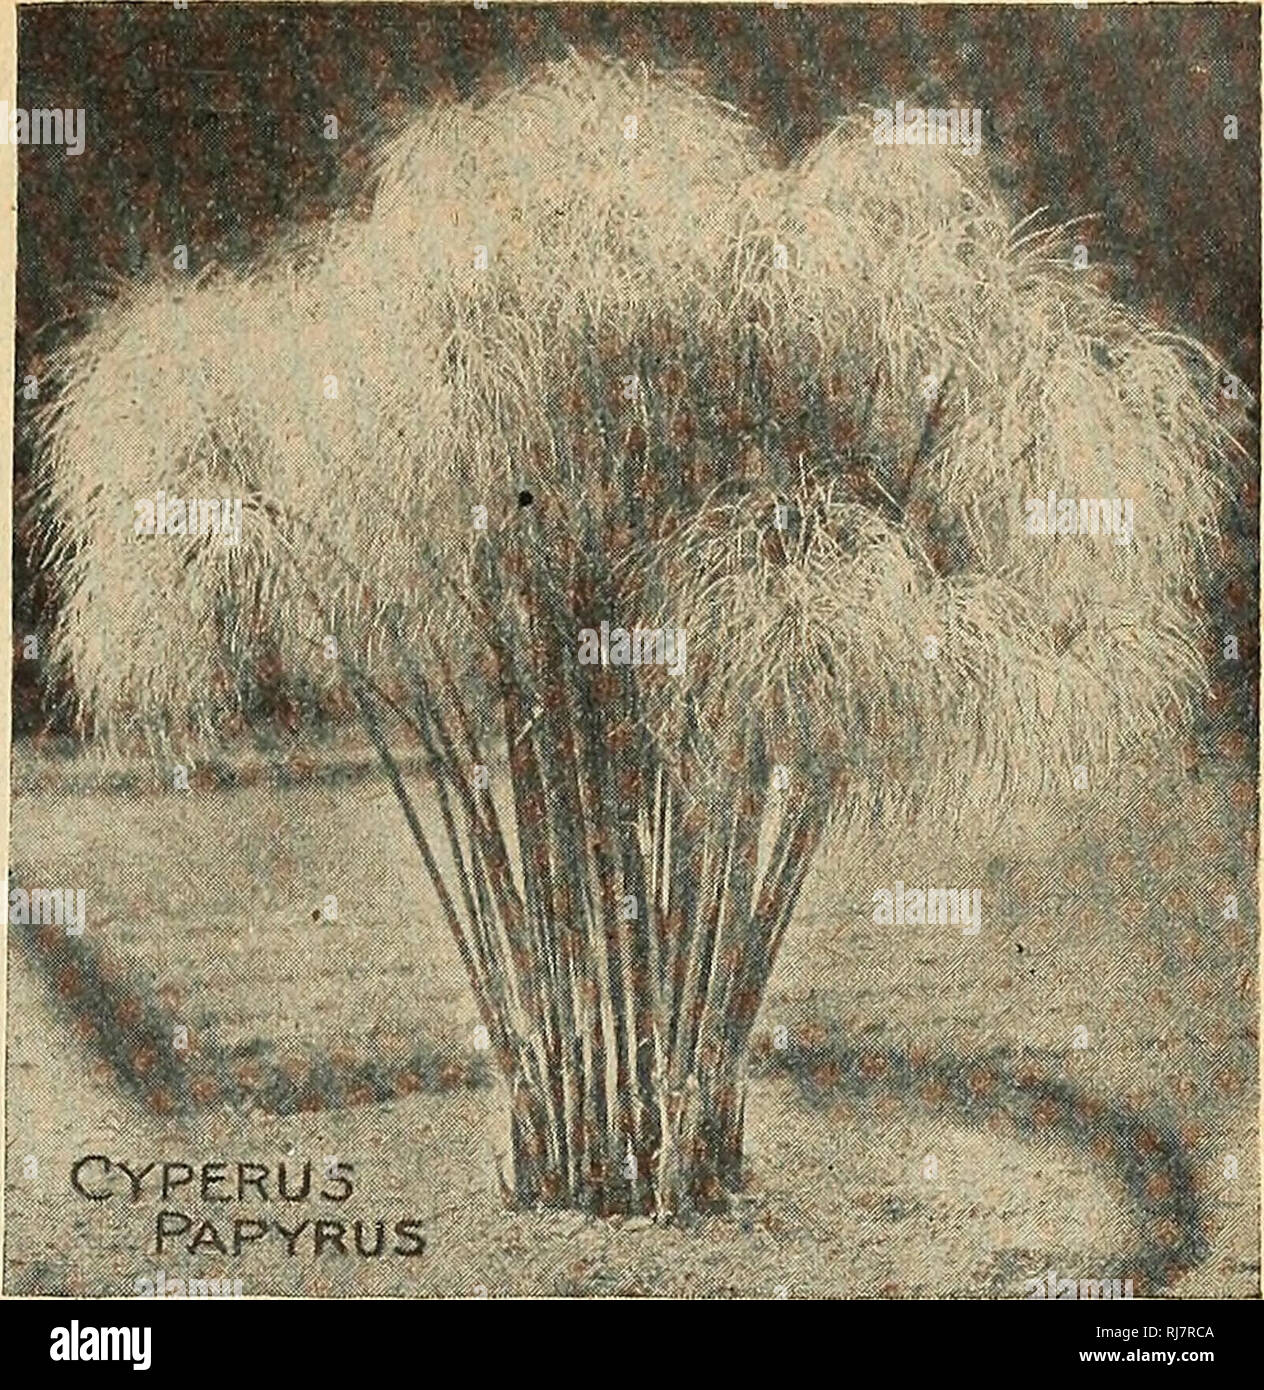 . Childs' 1924. Commercial catalogs Seeds; Nurseries (Horticulture) Catalogs; Seeds Catalogs; Flowers Catalogs; Vegetables Catalogs; Fruit Catalogs; John Lewis Childs (Firm); Commercial catalogs; Nurseries (Horticulture); Seeds; Flowers; Vegetables; Fruit. Fountain Cyperus is one of the most magnificent plants for the lawn or garden Fountain CyperUS. Papyrus, Paper Plant. This is the rare old Egyptian bullrush. From the fibrous parts of the tall, slender stems was made the paper of ancient times. It is at home in damp places or along the margins of streams or ponds, but it also grows well with Stock Photo